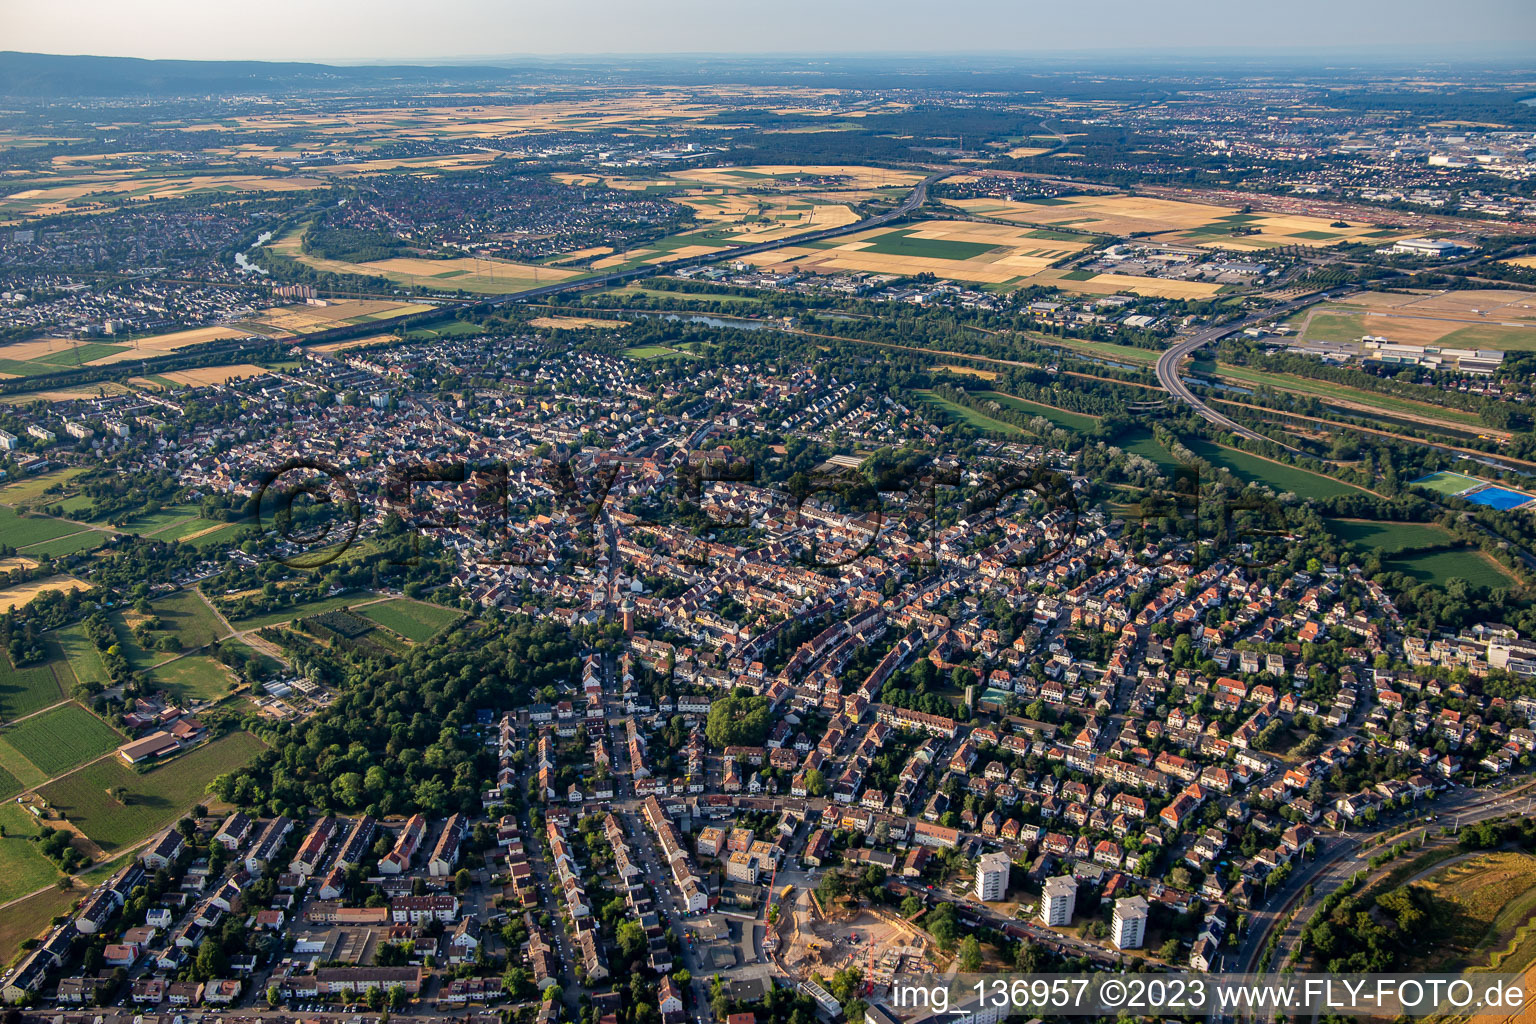 From the west in the district Feudenheim in Mannheim in the state Baden-Wuerttemberg, Germany